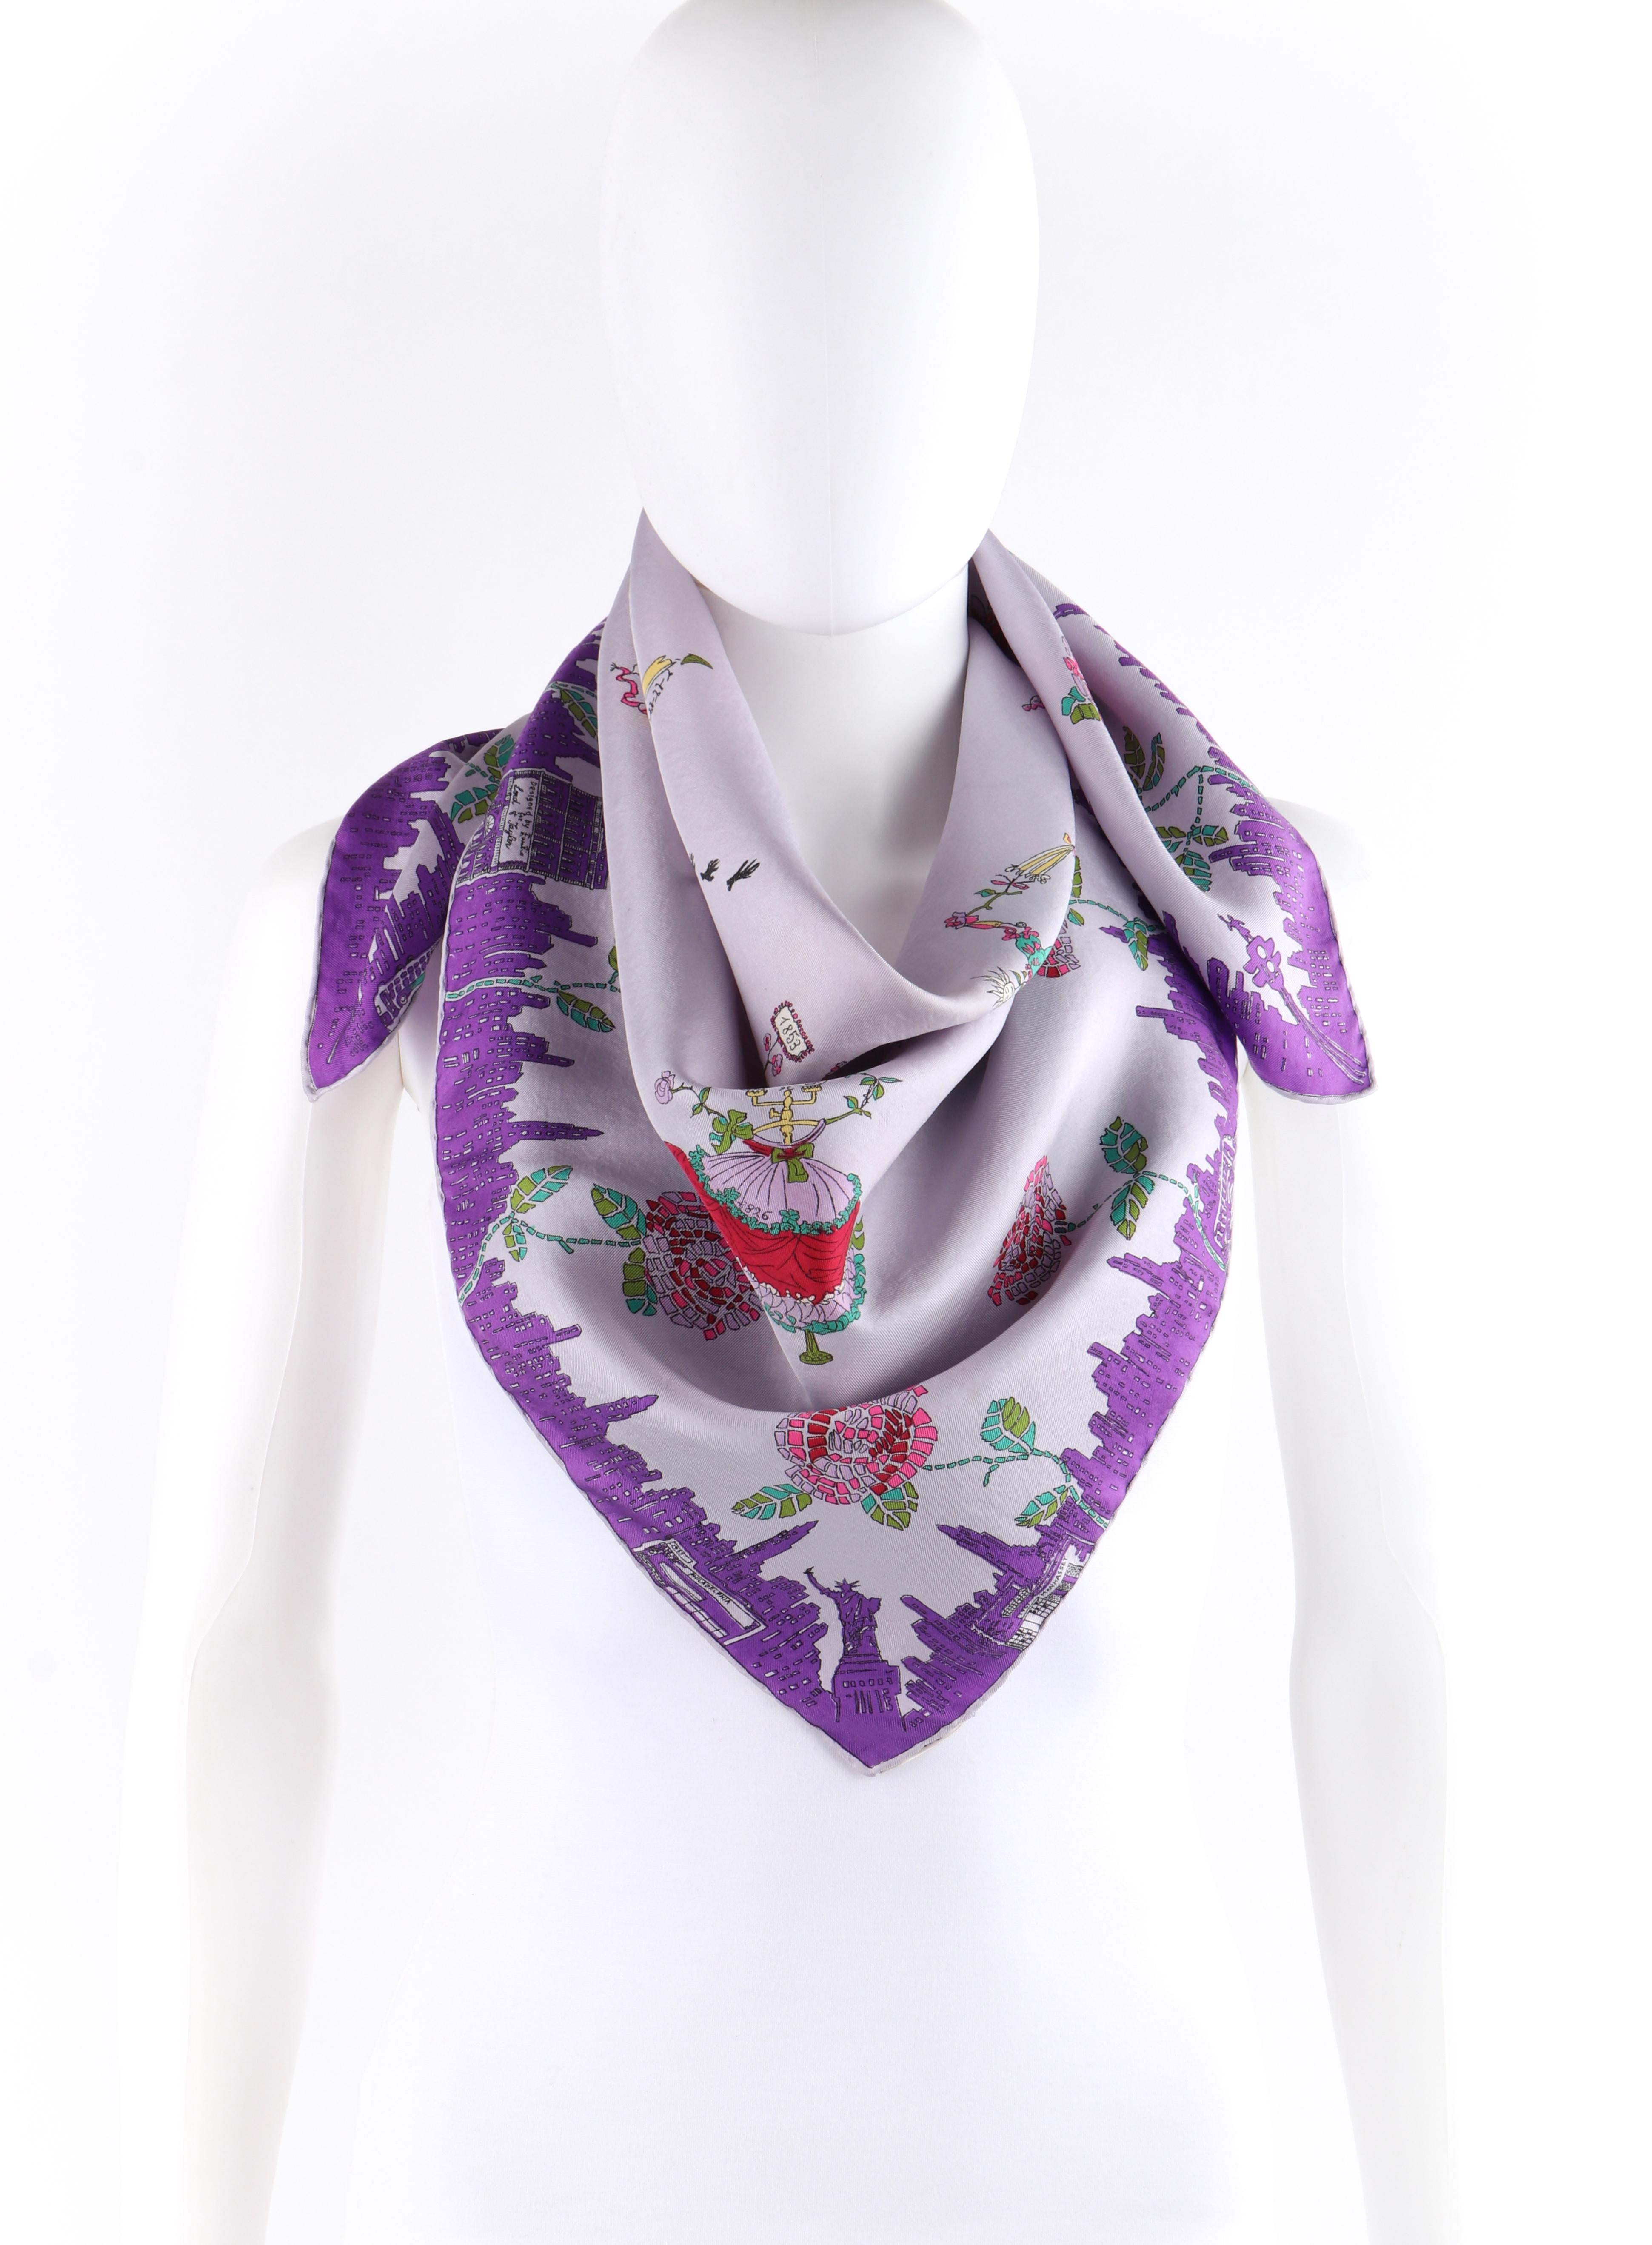 EMILIO PUCCI c.1955 'Emilio For Lord & Taylor' Novelty Figure Print Silk Scarf 

Brand/Manufacturer: Lord & Taylor
Circa: 1955
Designer: Emilio Pucci
Style: Square scarf
Color(s): Shades of purple, yellow, green, red, pink, and blue
Lined: